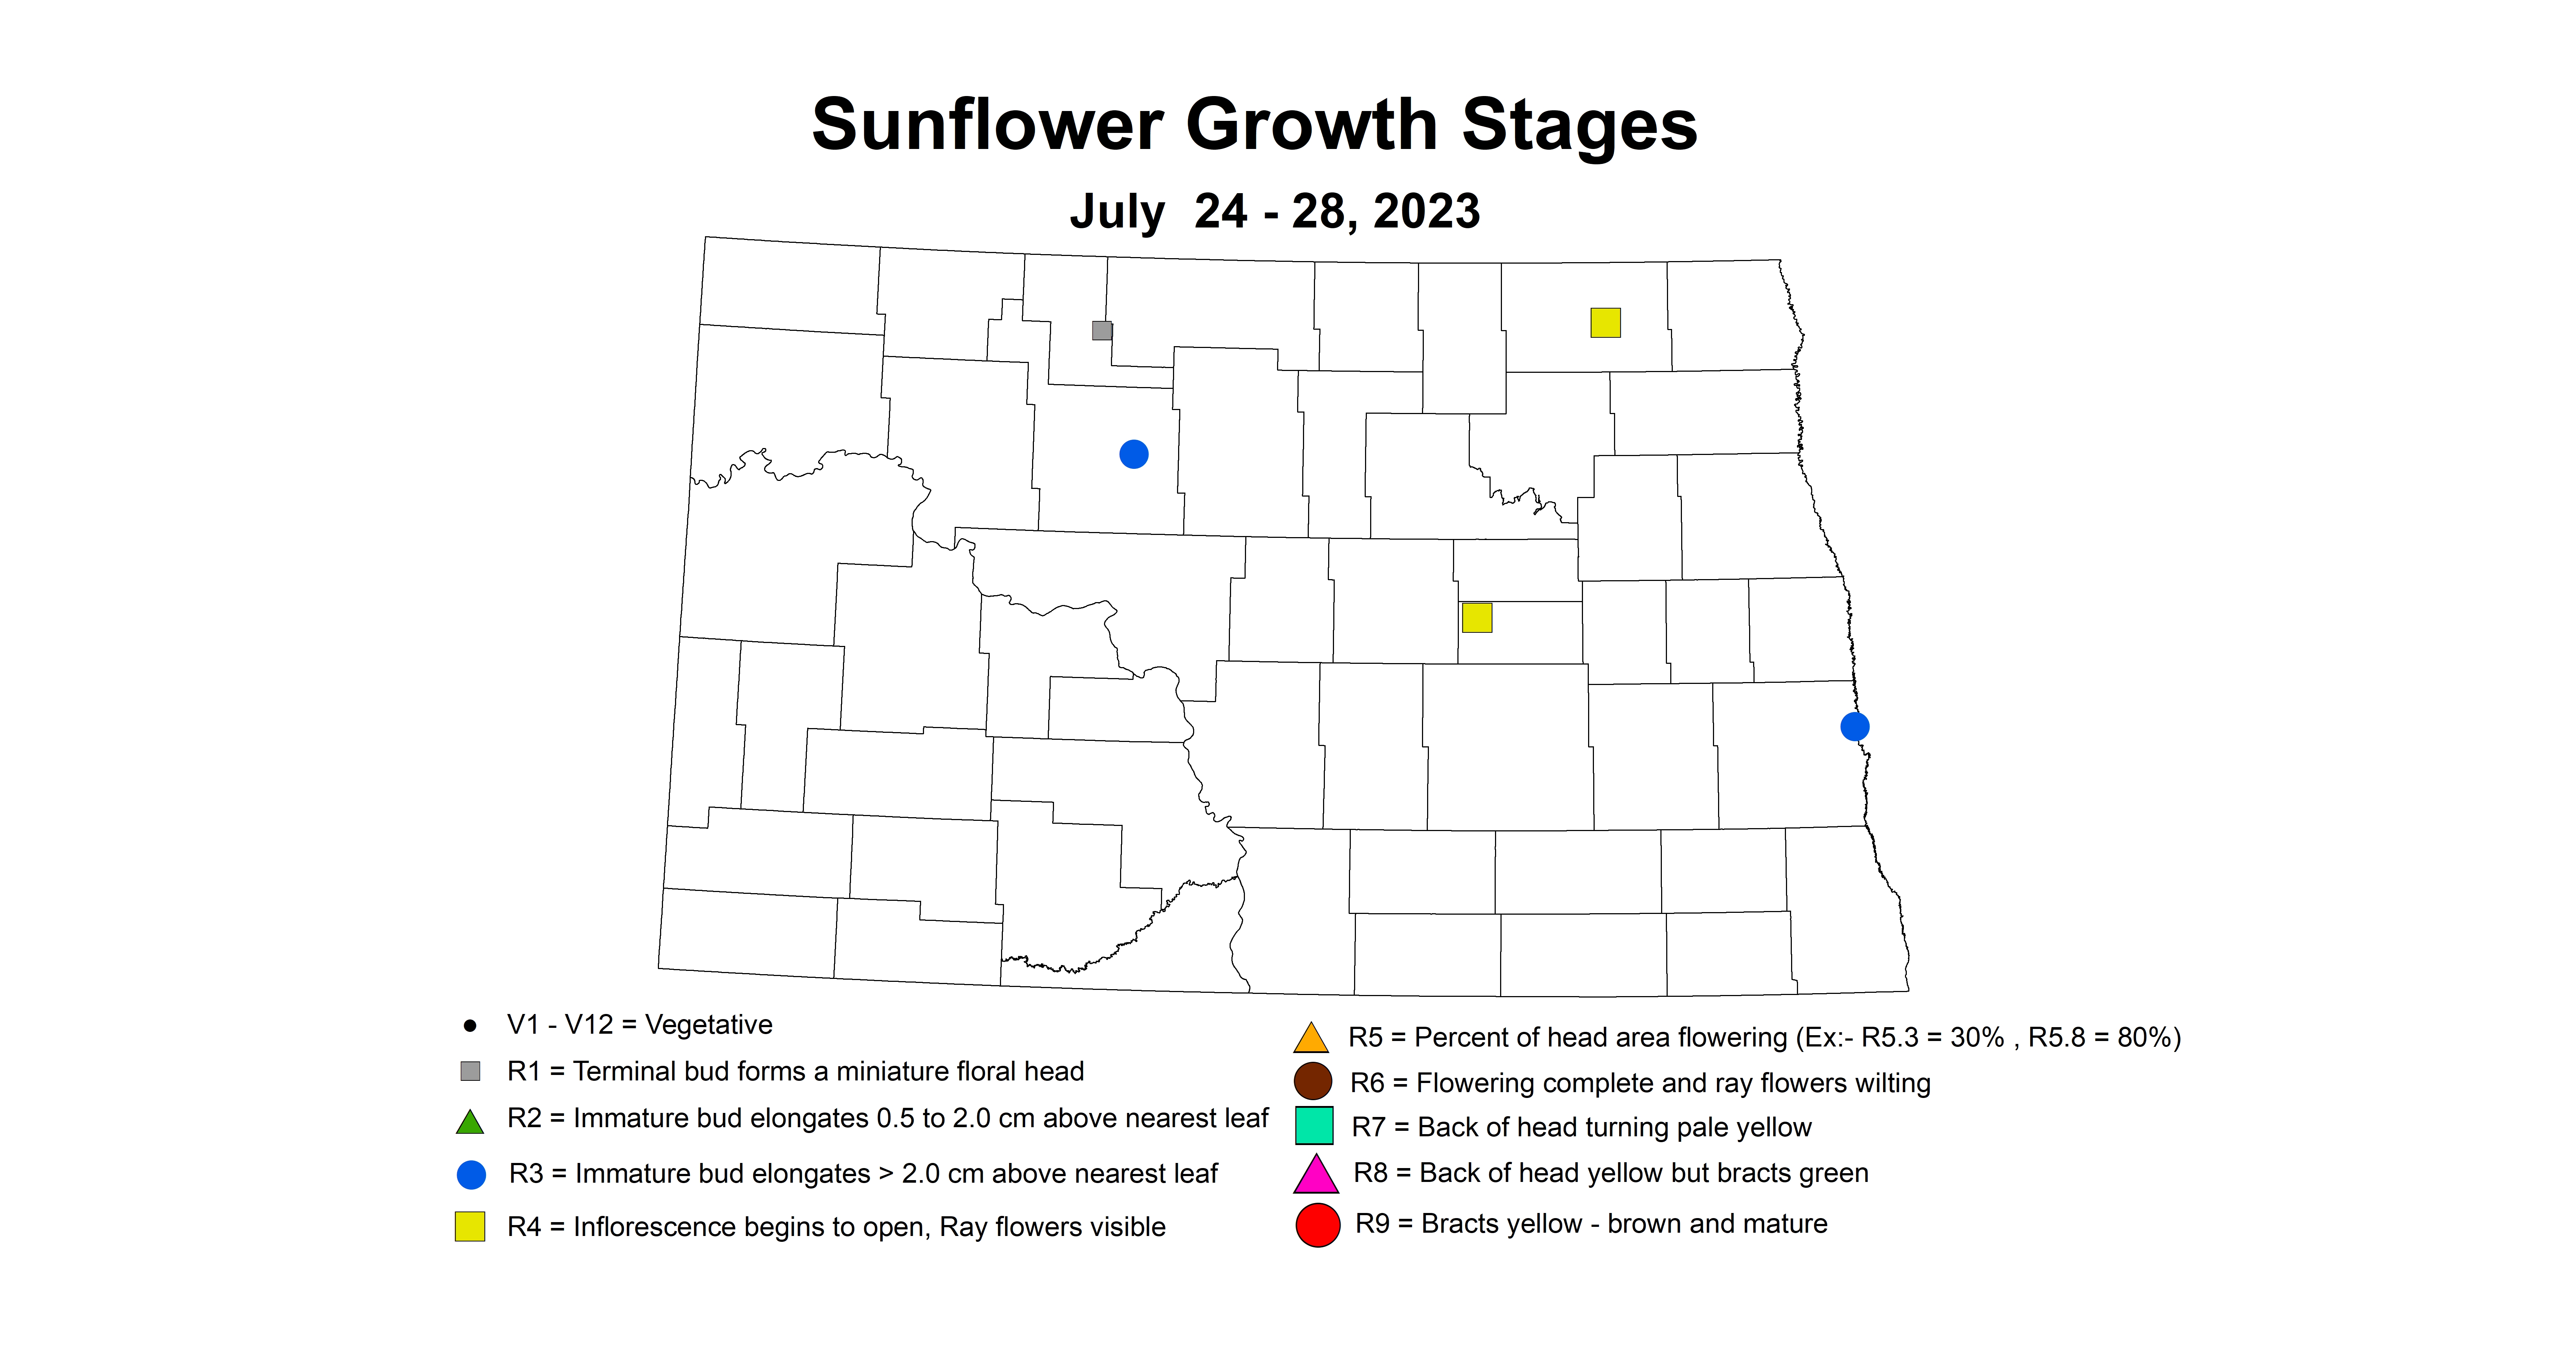 sunflower insecttrap growth stages July 24-28 2023